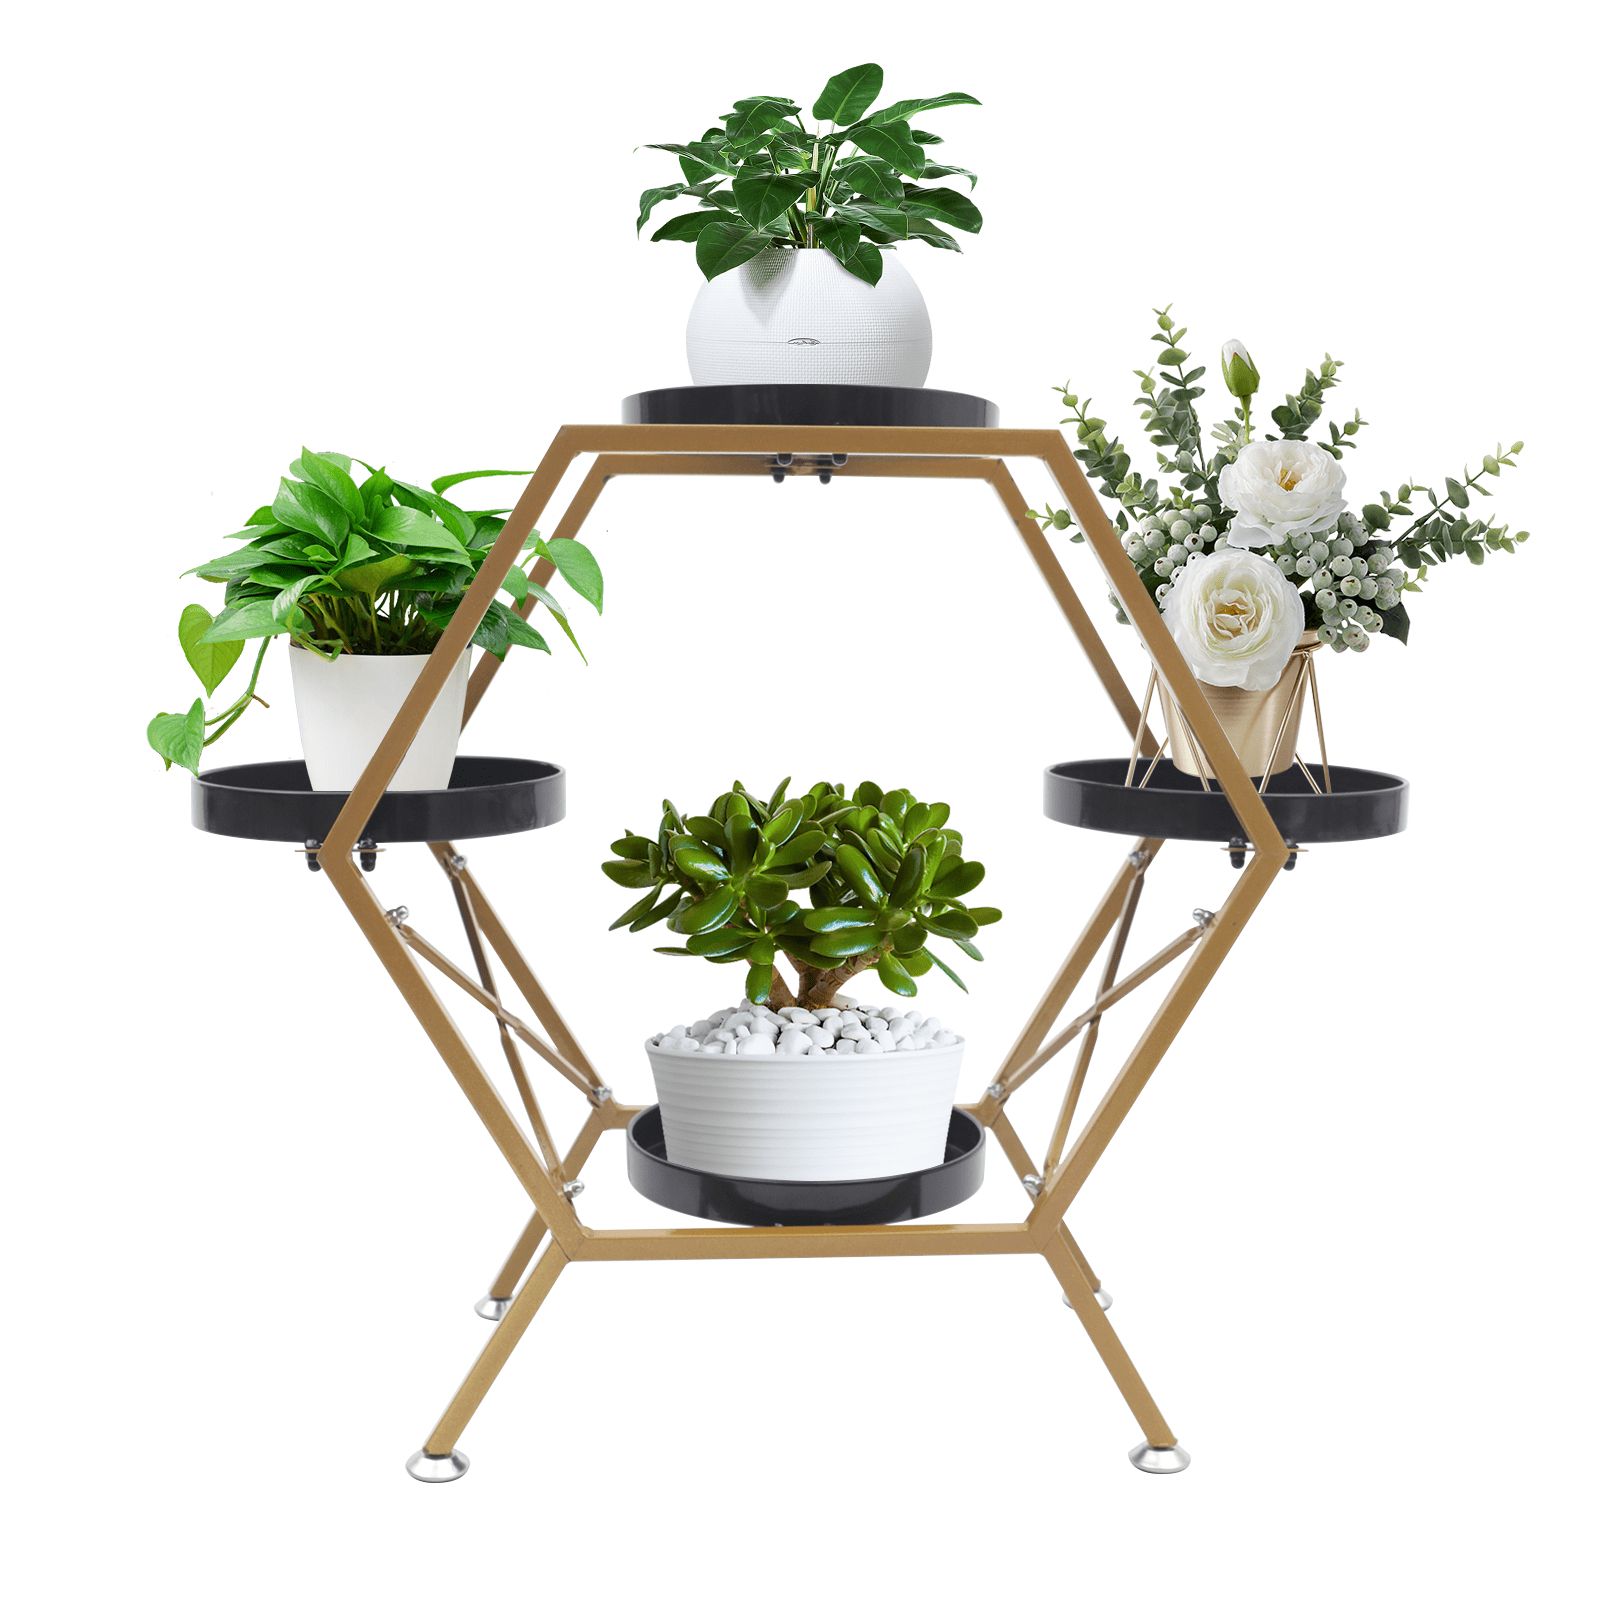 Current Ethedeal Hexagon Gold Metal Plant Stand 4 Trays Flower Pot Holder Display  Garden Balcony – Walmart In Hexagon Plant Stands (View 9 of 10)